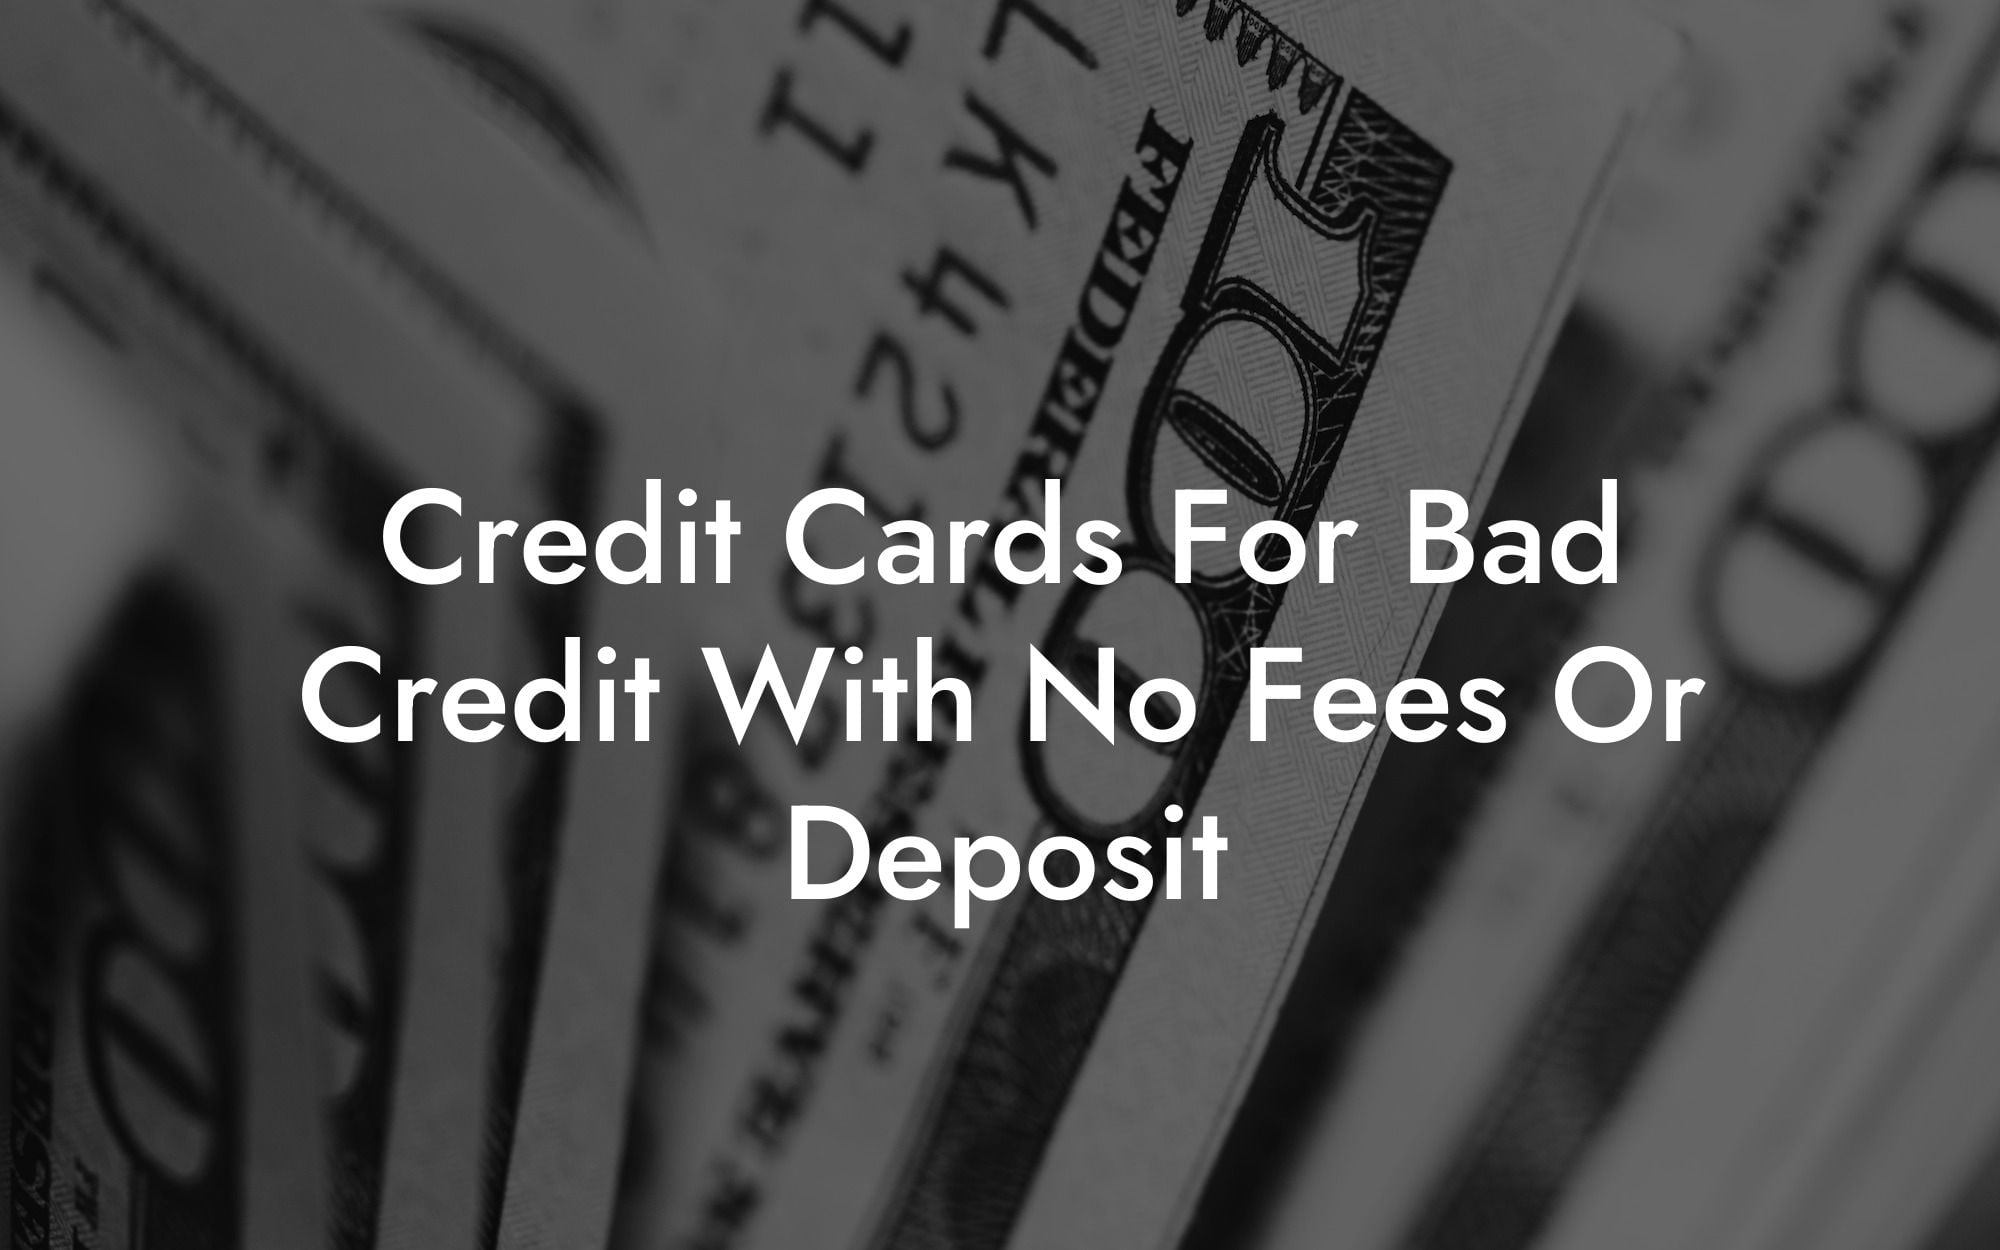 Credit Cards For Bad Credit With No Fees Or Deposit